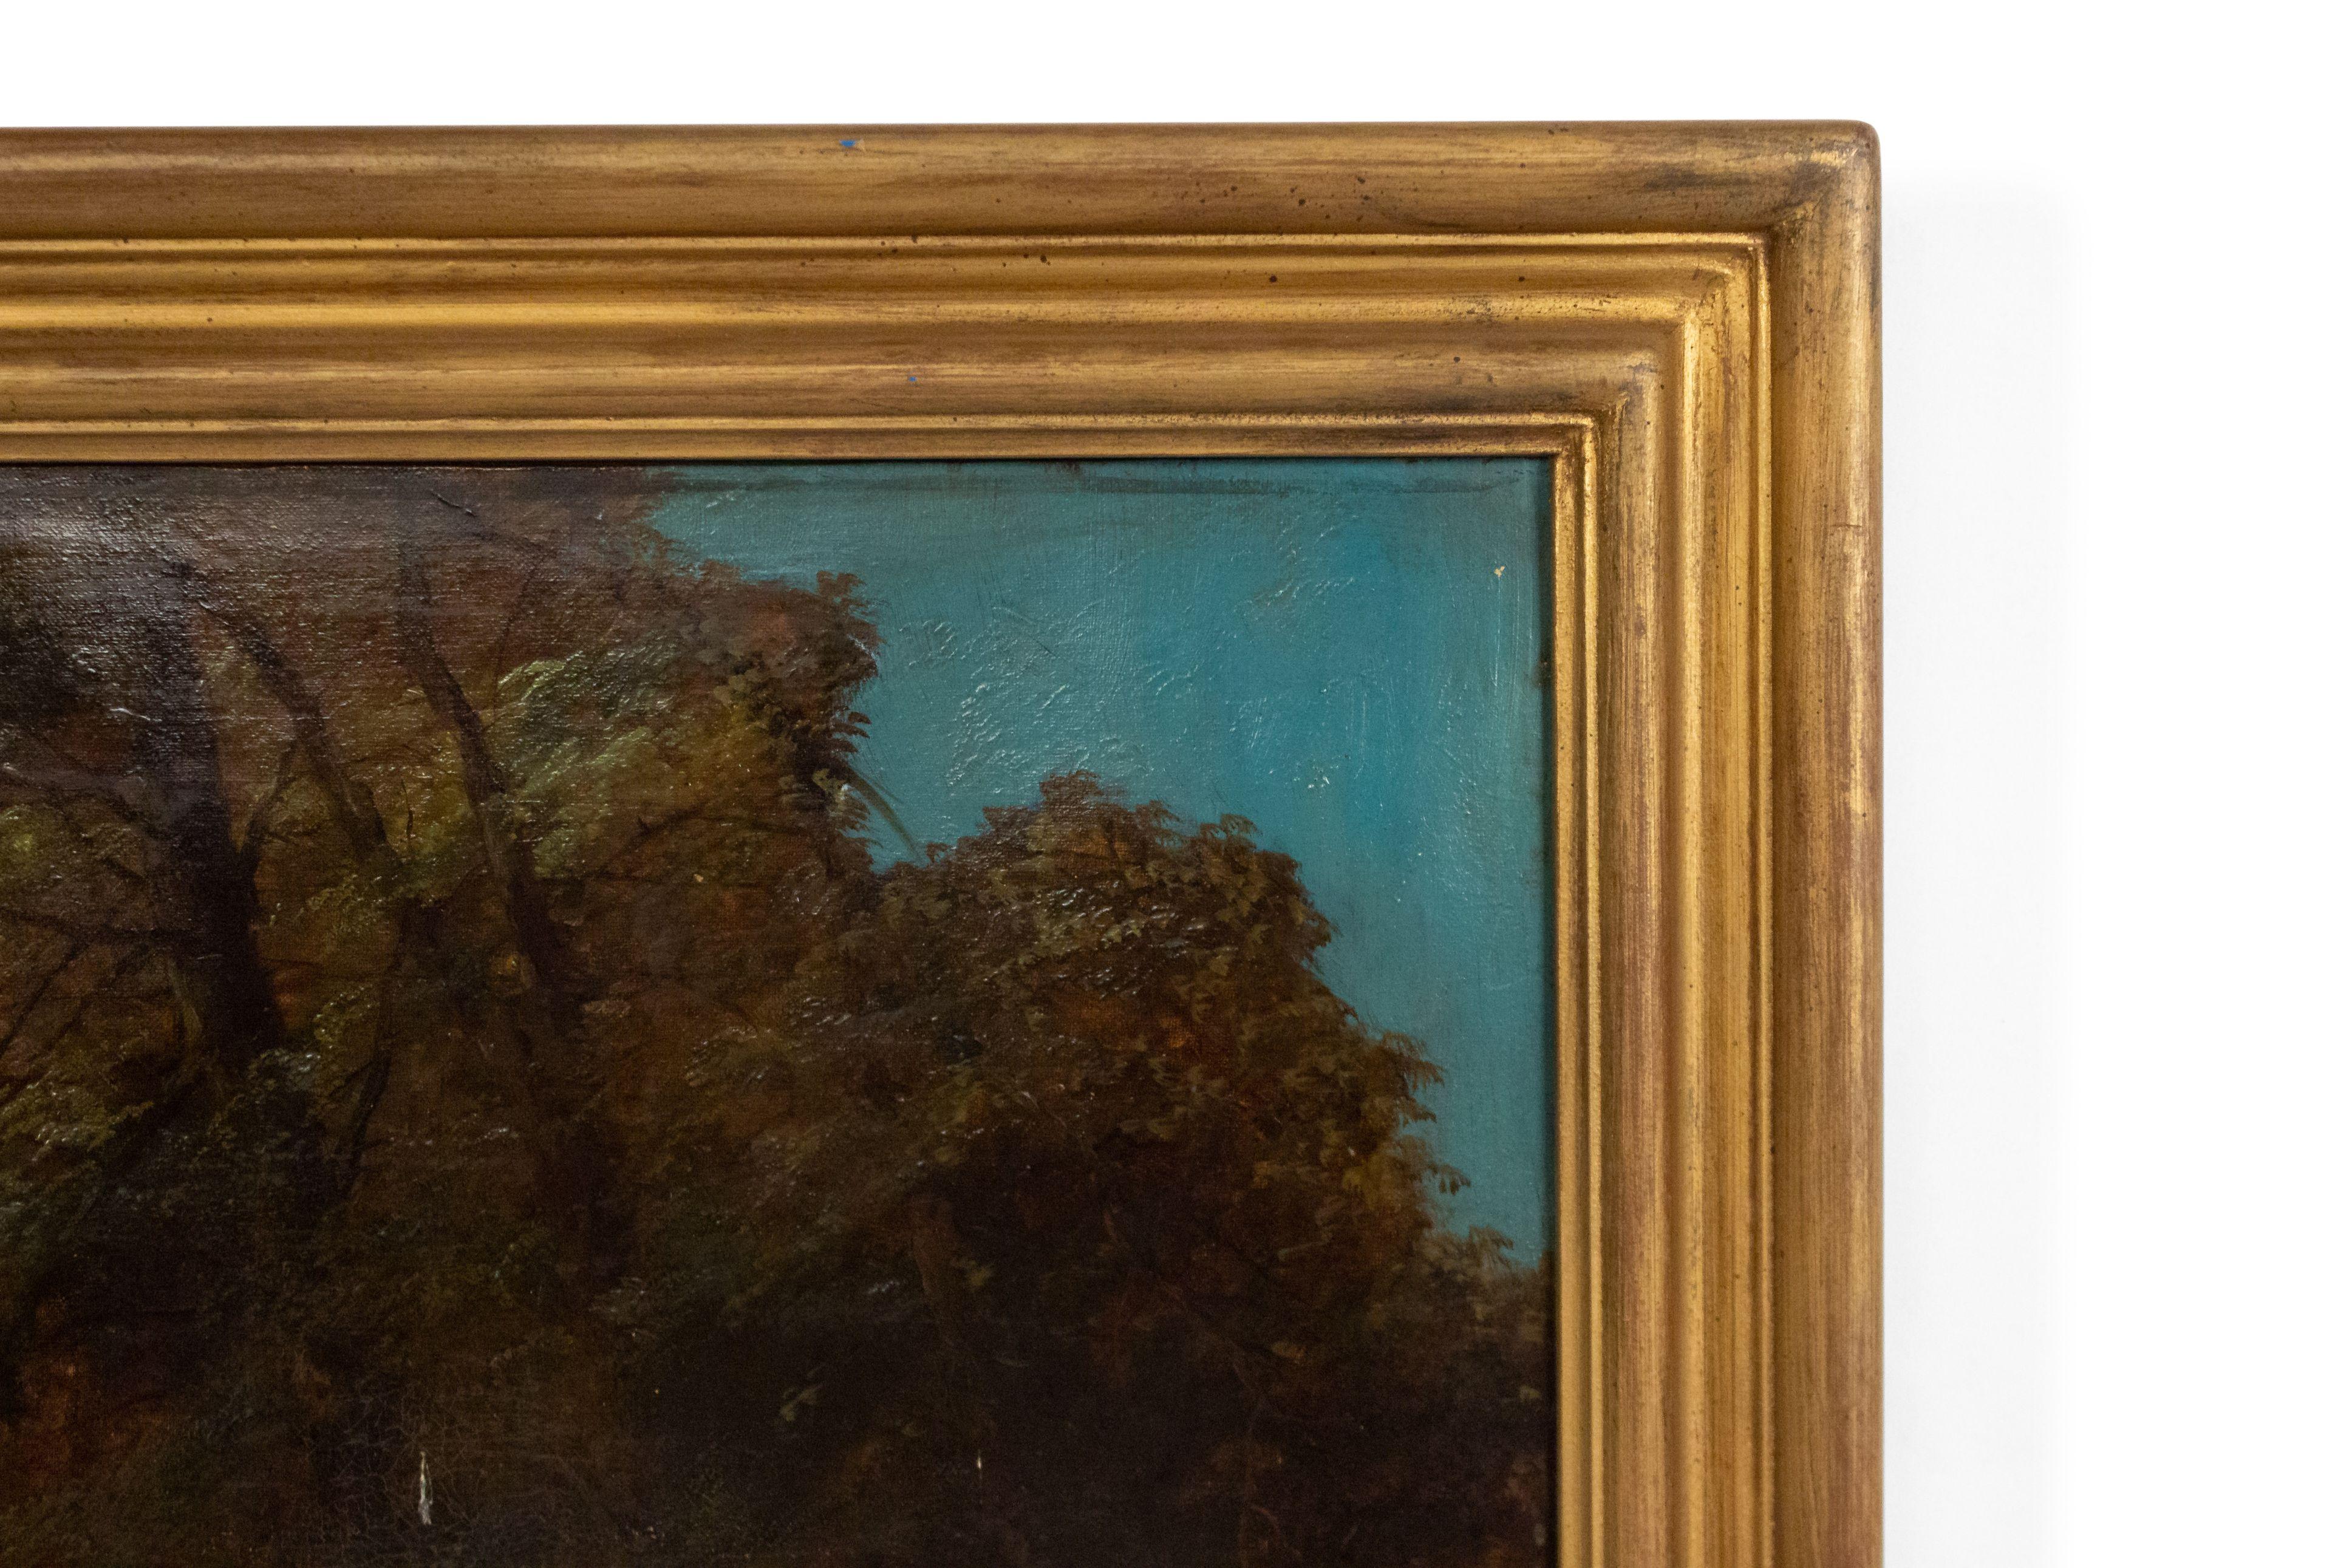 Late 19th century pastoral oil painting of figures in forest by stream with fallen tree mounted in a gilt frame.